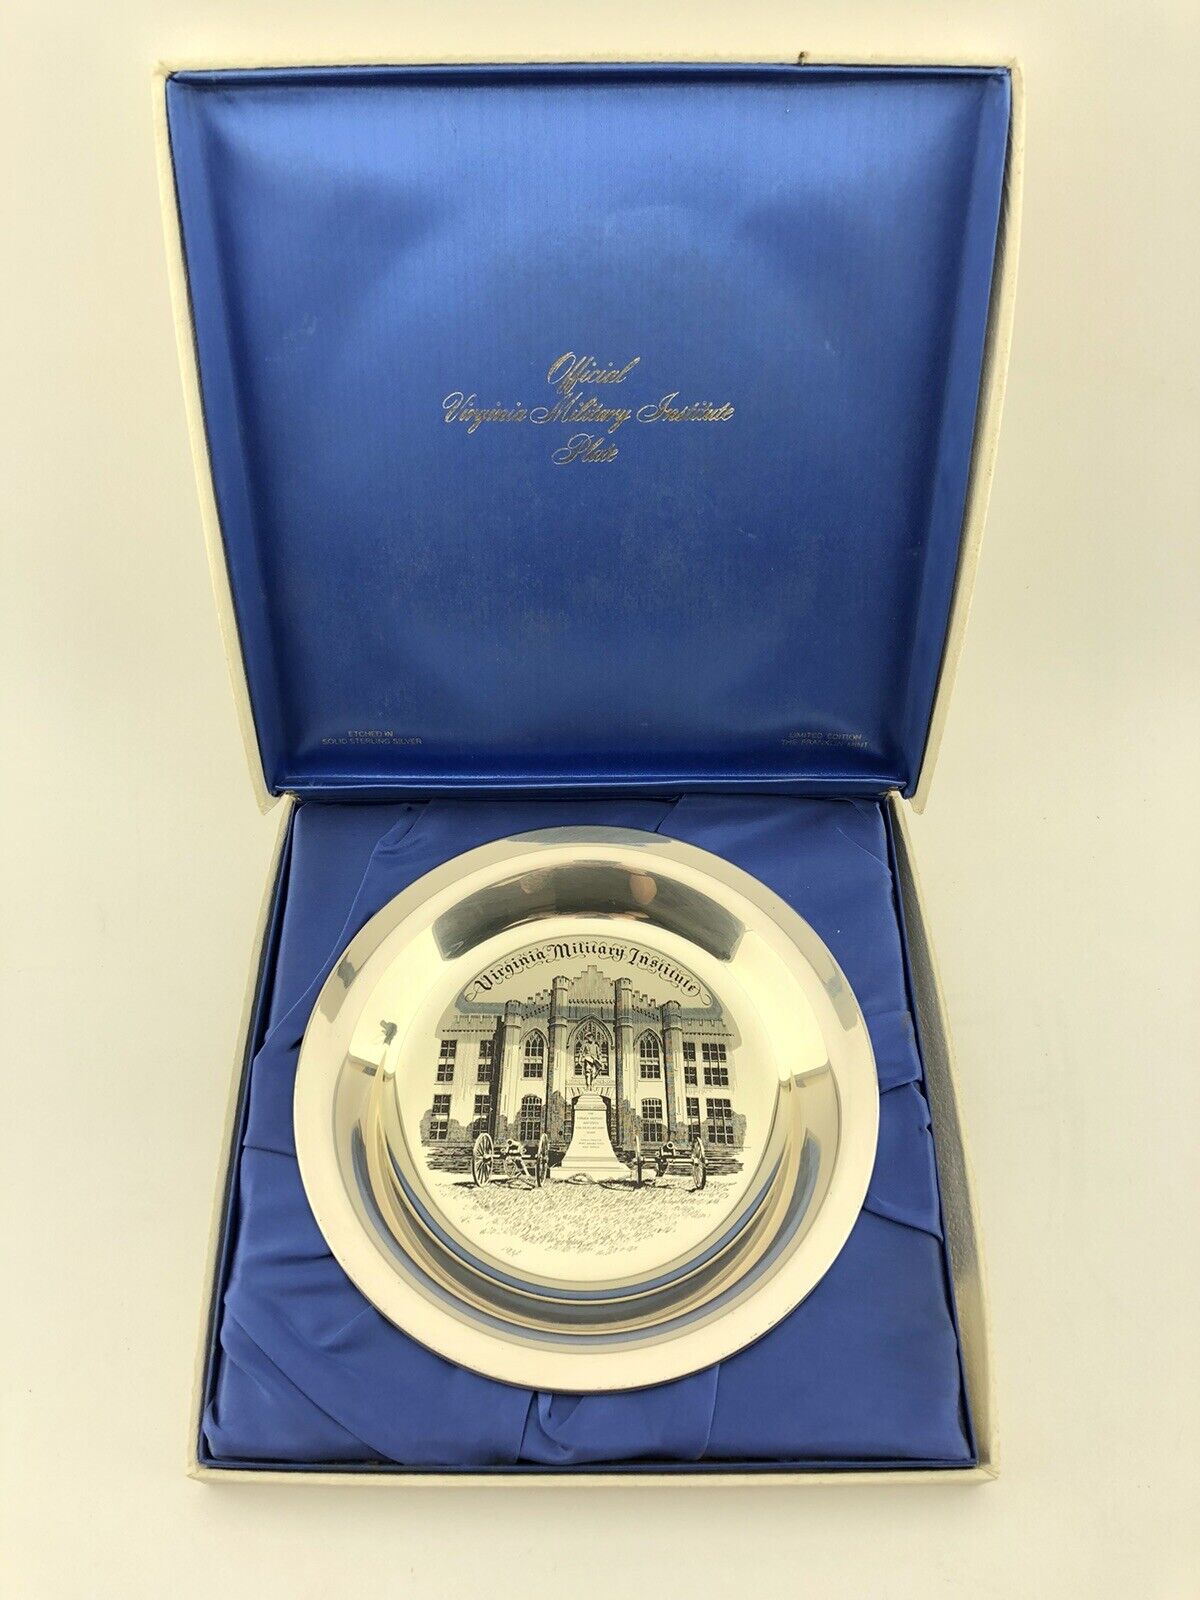 Franklin Mint Virginia Military Institute Limited Edition Solid Sterling Silver